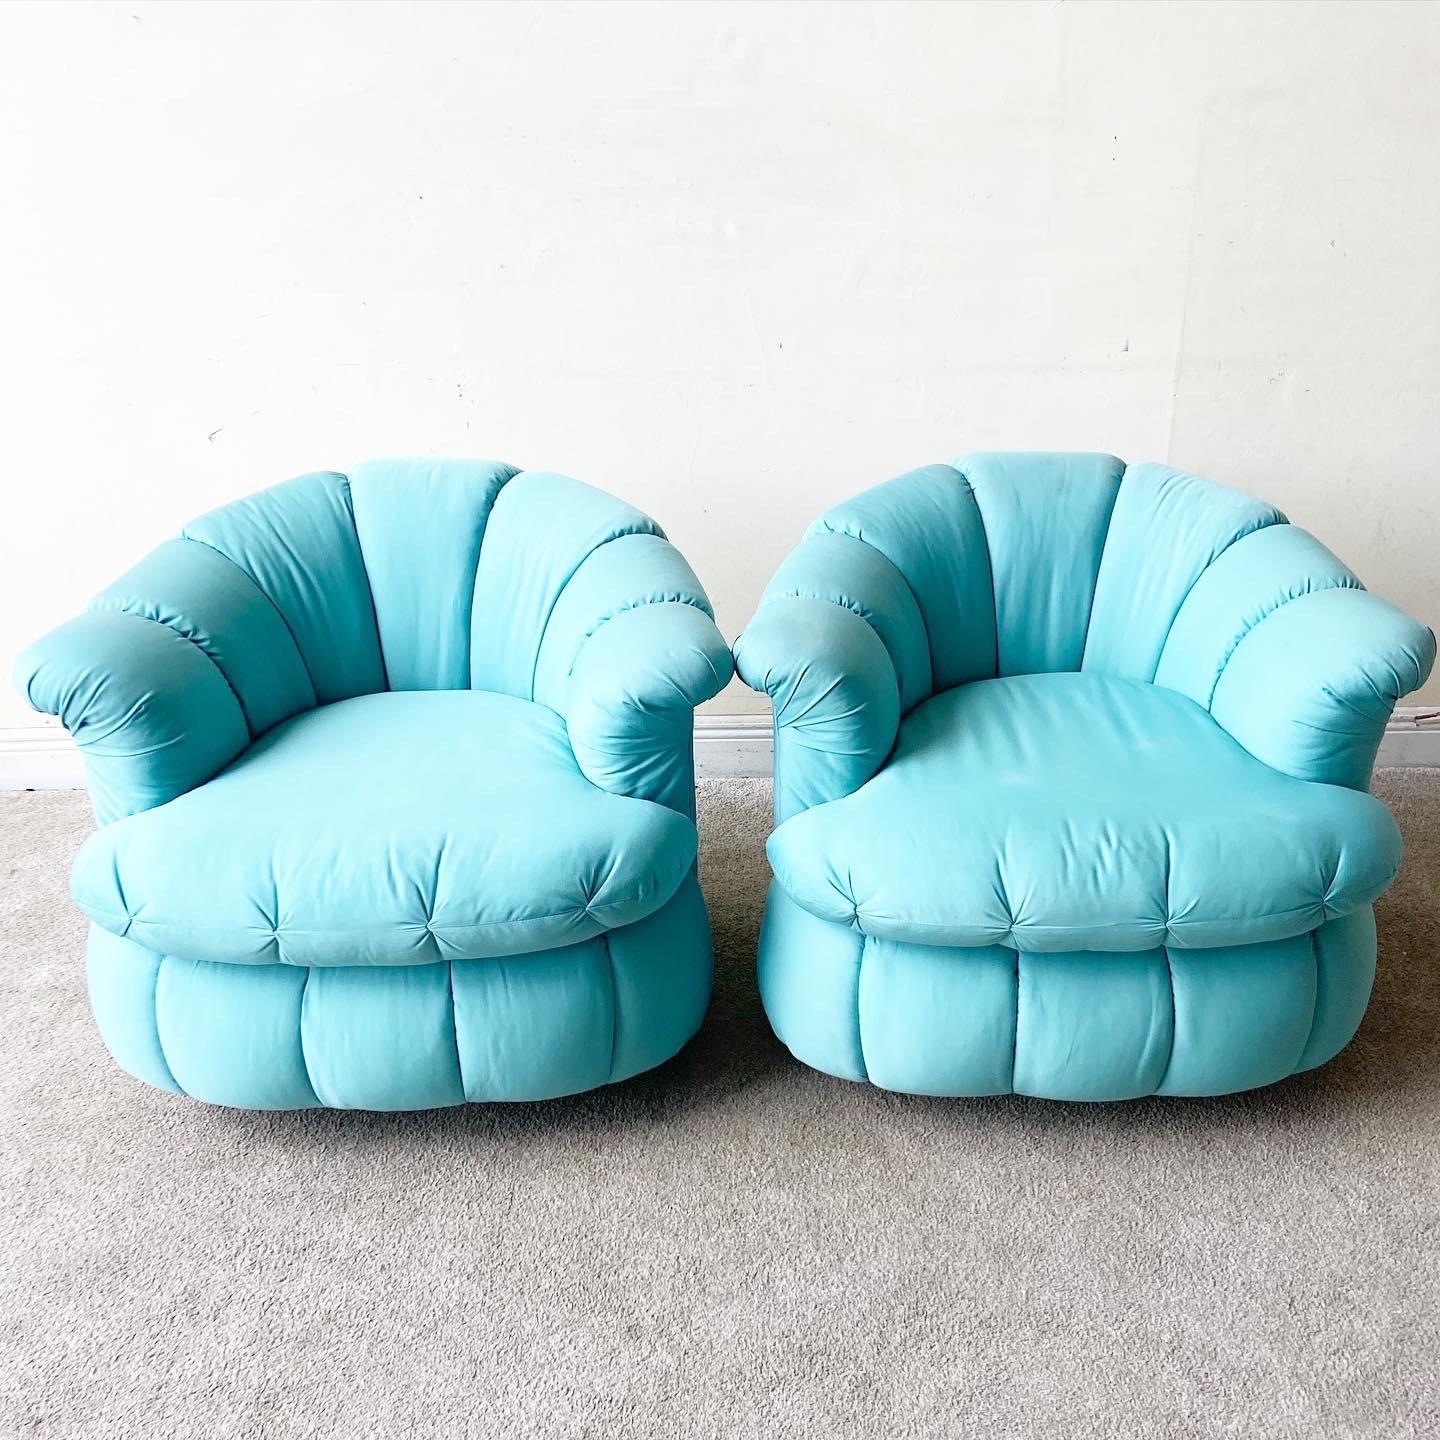 Incredible pair of postmodern swivel chairs. Each chair displays a channeled back clam shell frame with a soft turquoise blue fabric.